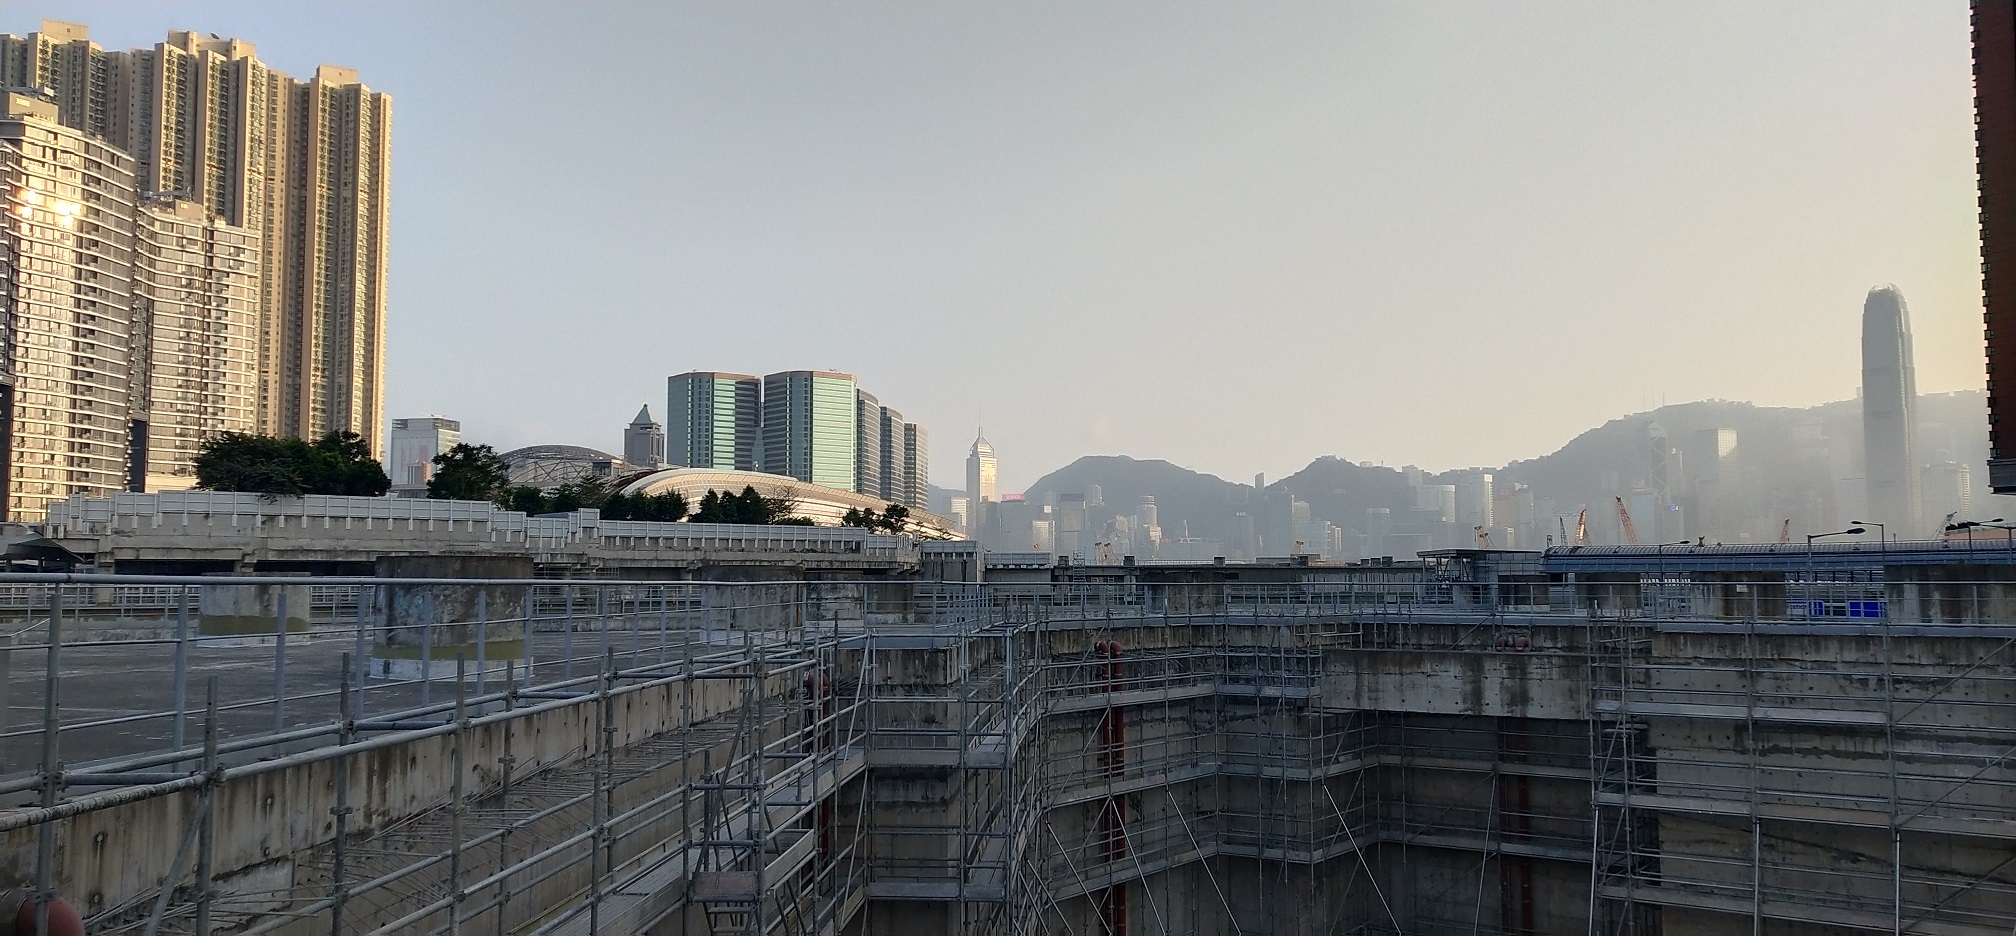 The rooftop of West Kowloon will have high-rise development soon.